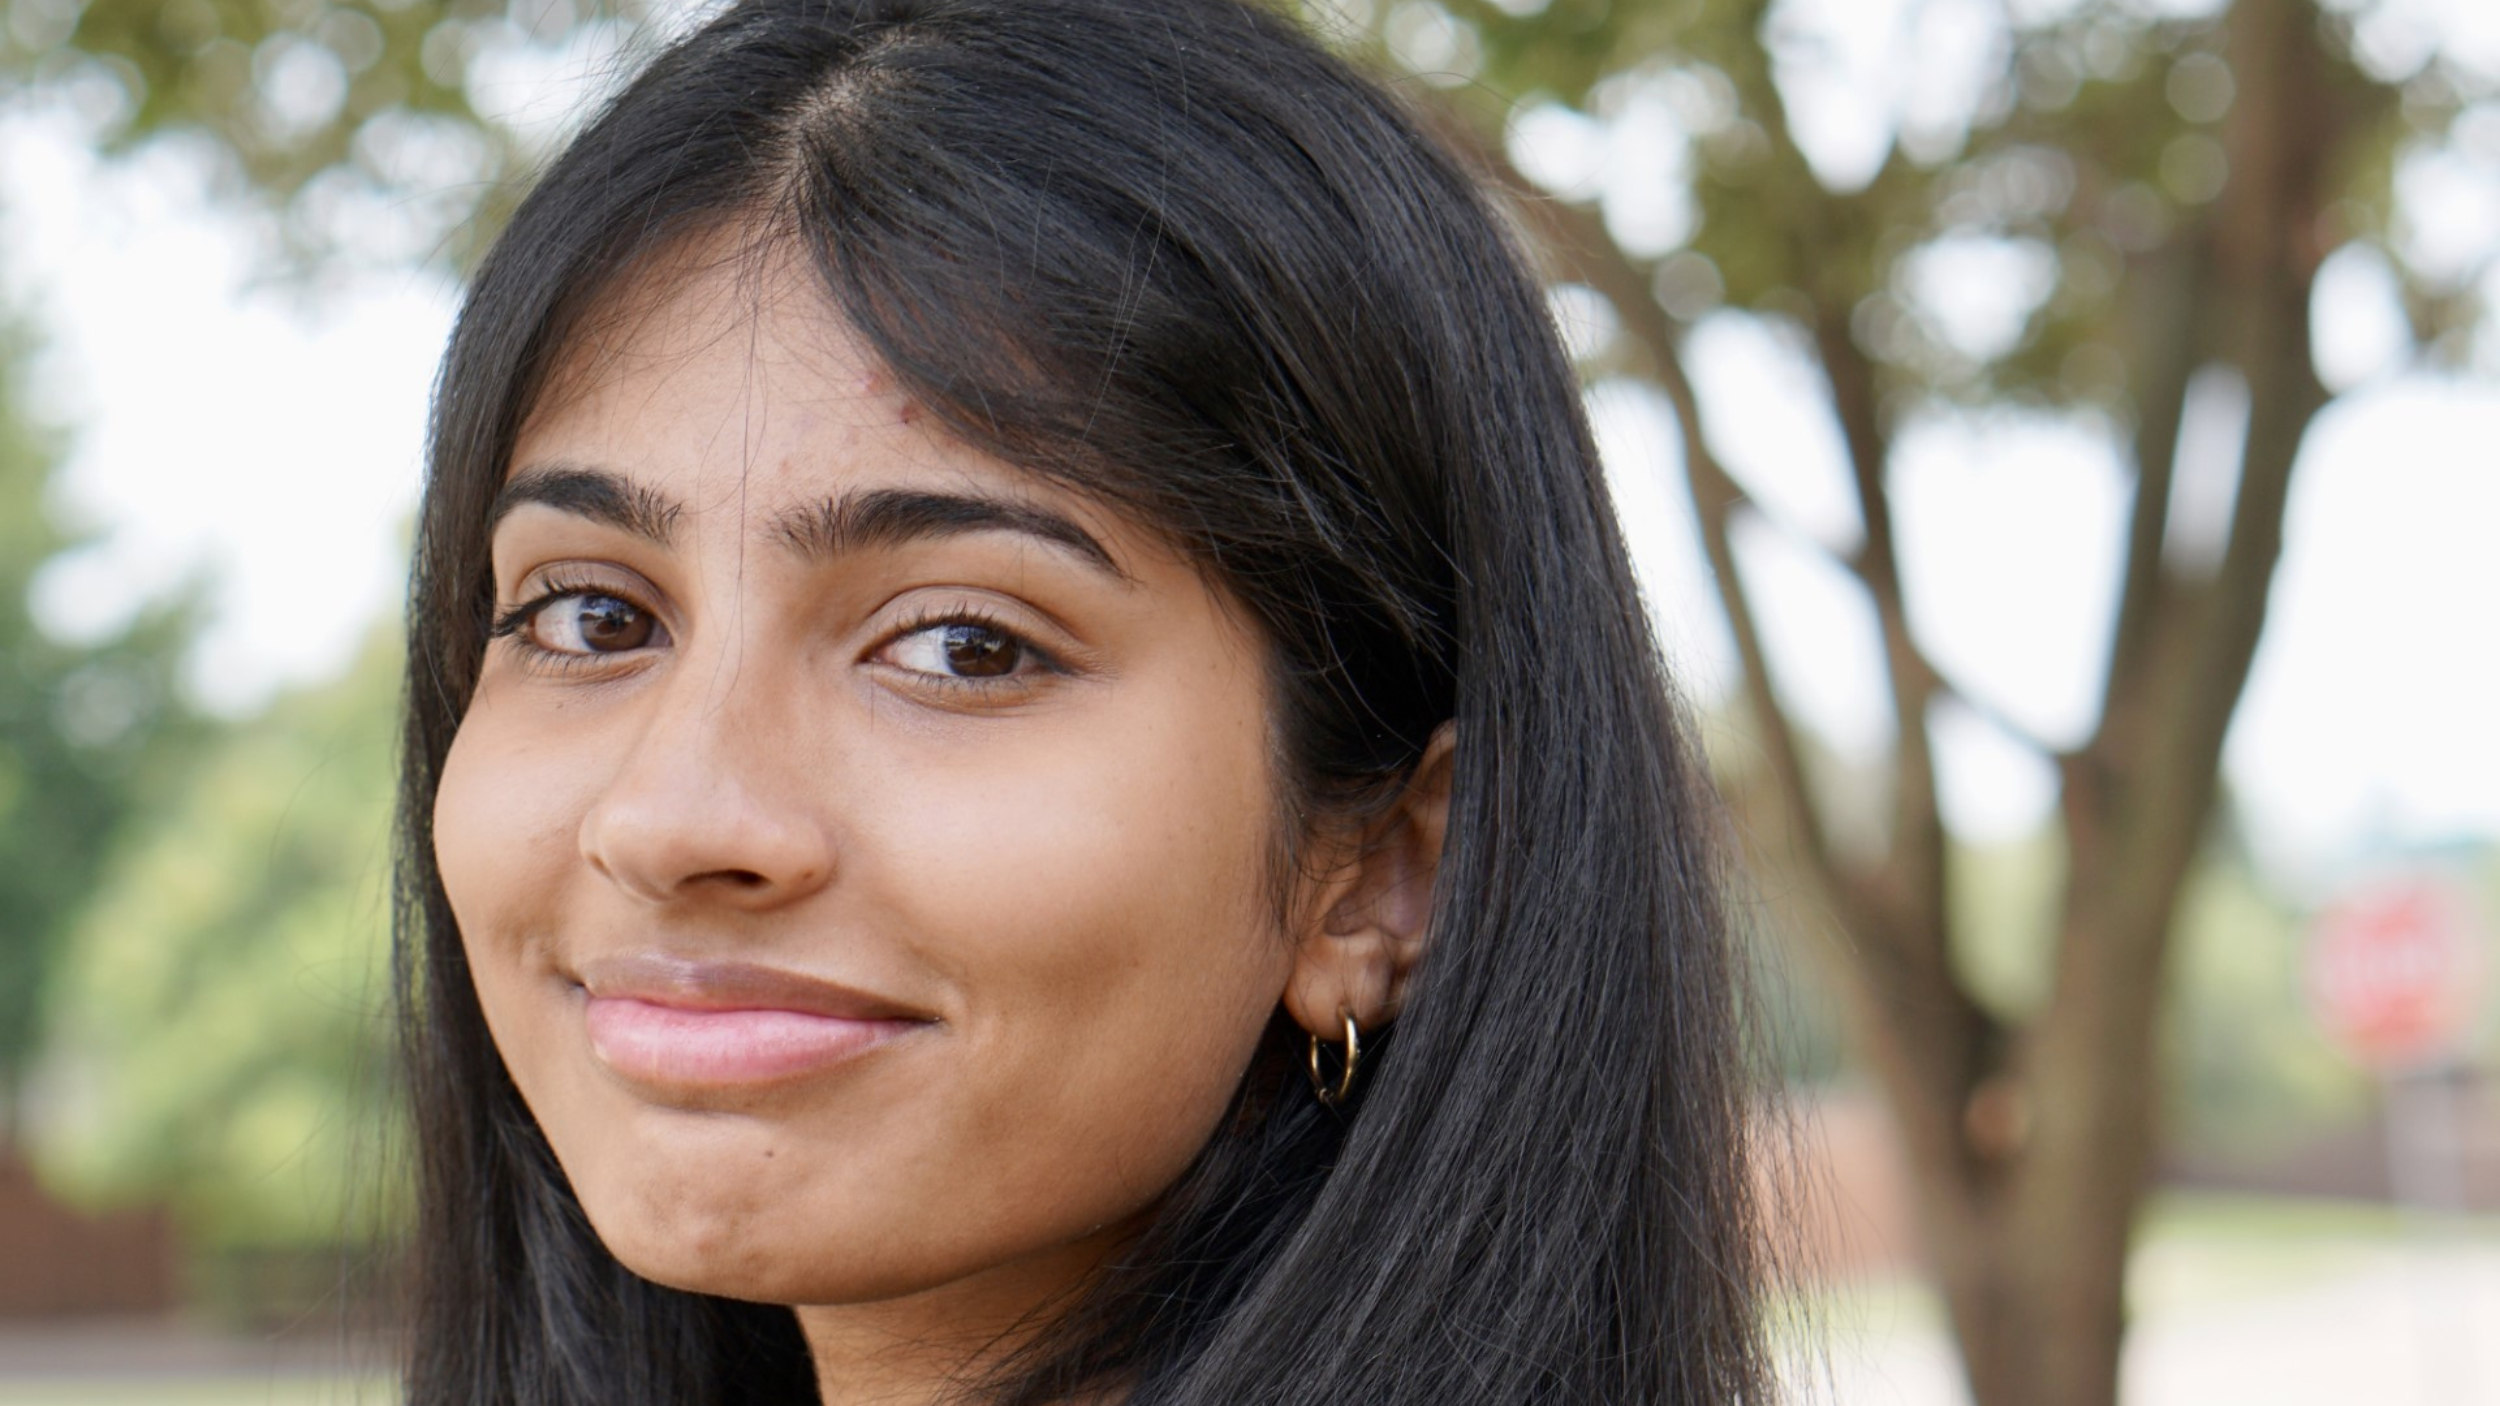 Sneha, a software engineering intern, facing away from the camera and smiling while wearing a black shirt.